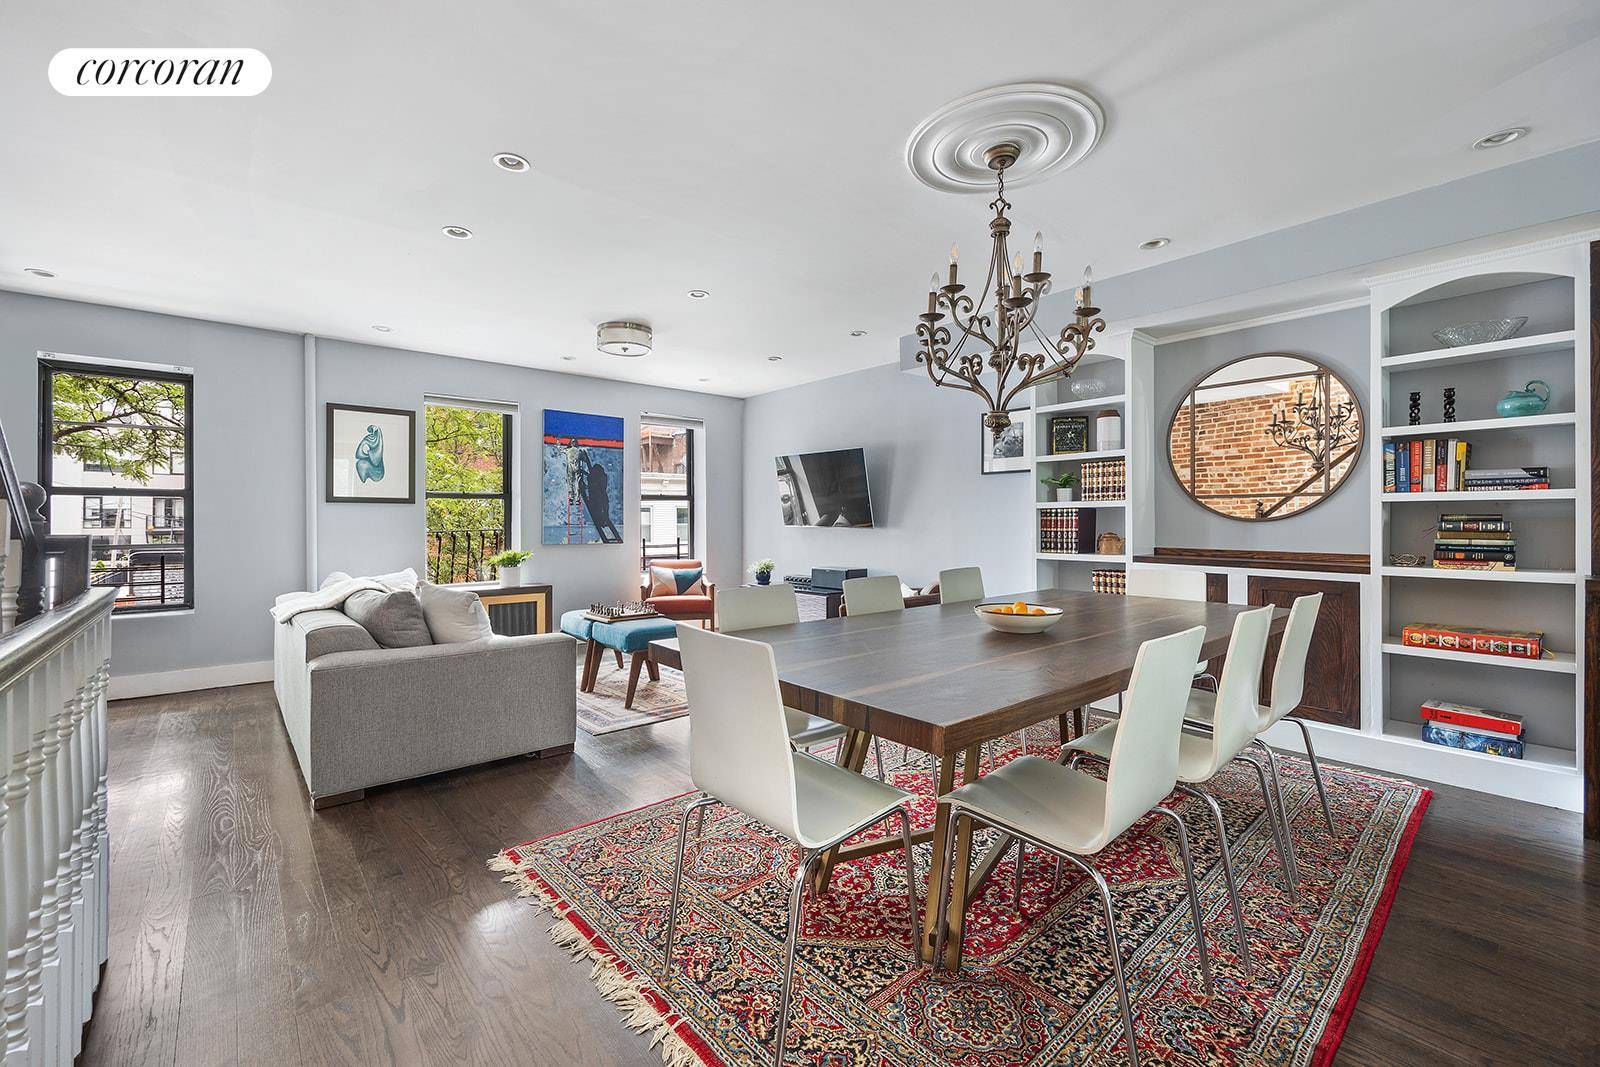 19 Garfield Place is a unique opportunity to rent a furnished house with a backyard in Park Slope for one year.